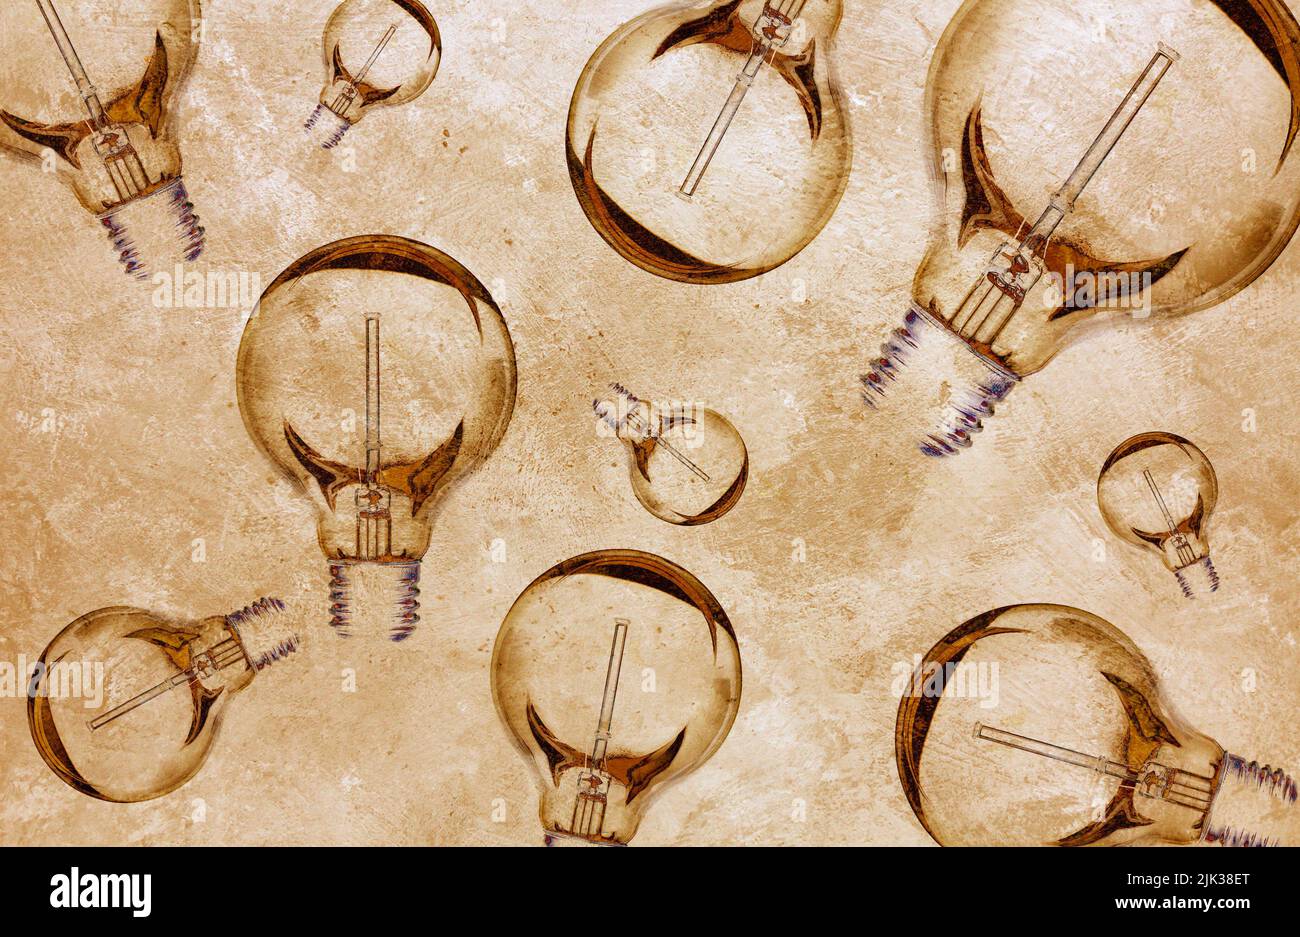 Lightbulbs in a brow color grid - stock photo Stock Photo